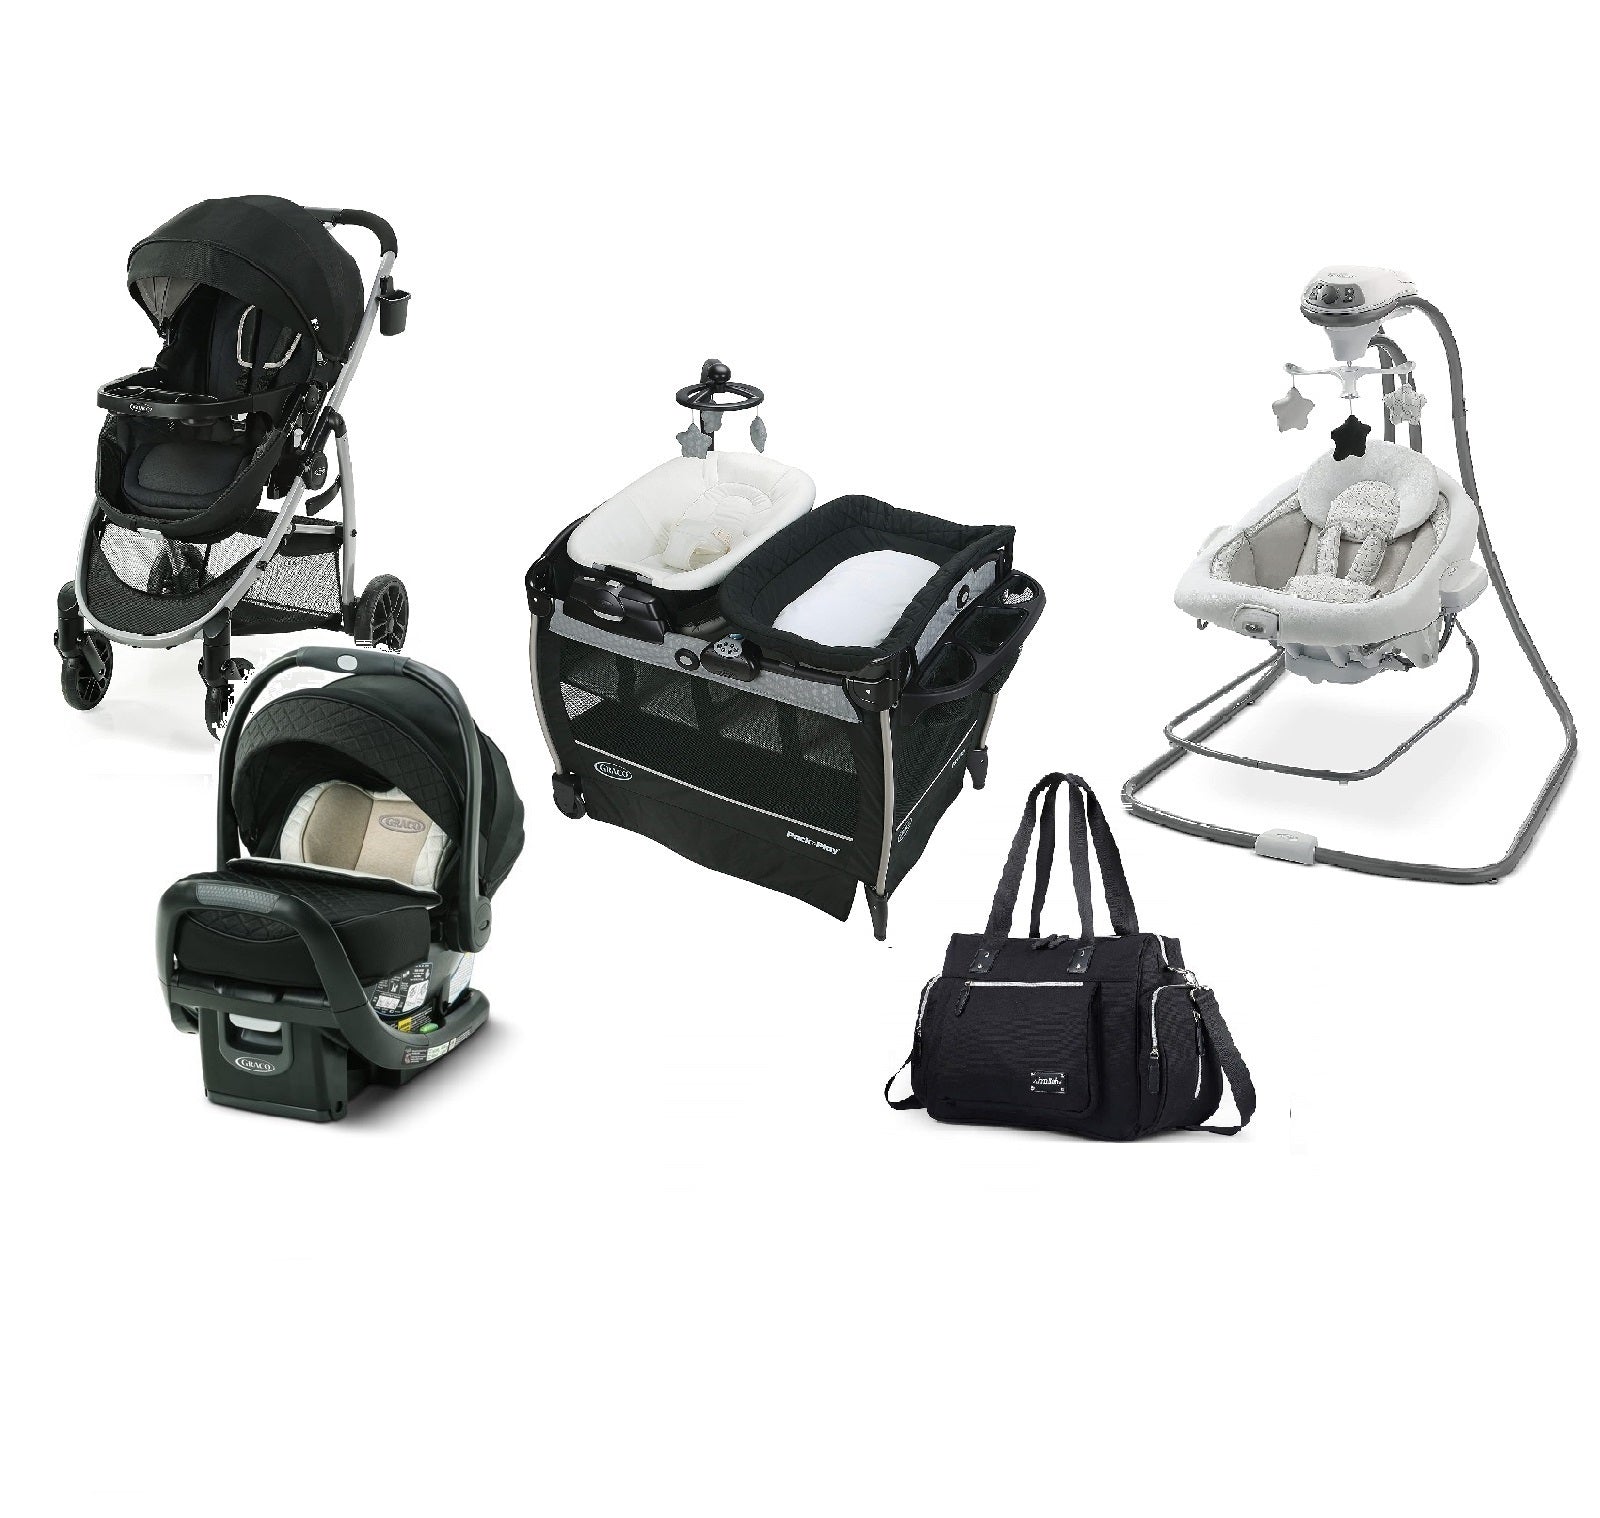 5pc Graco Black Complete Baby Gear Bundle, Stroller Travel Syste